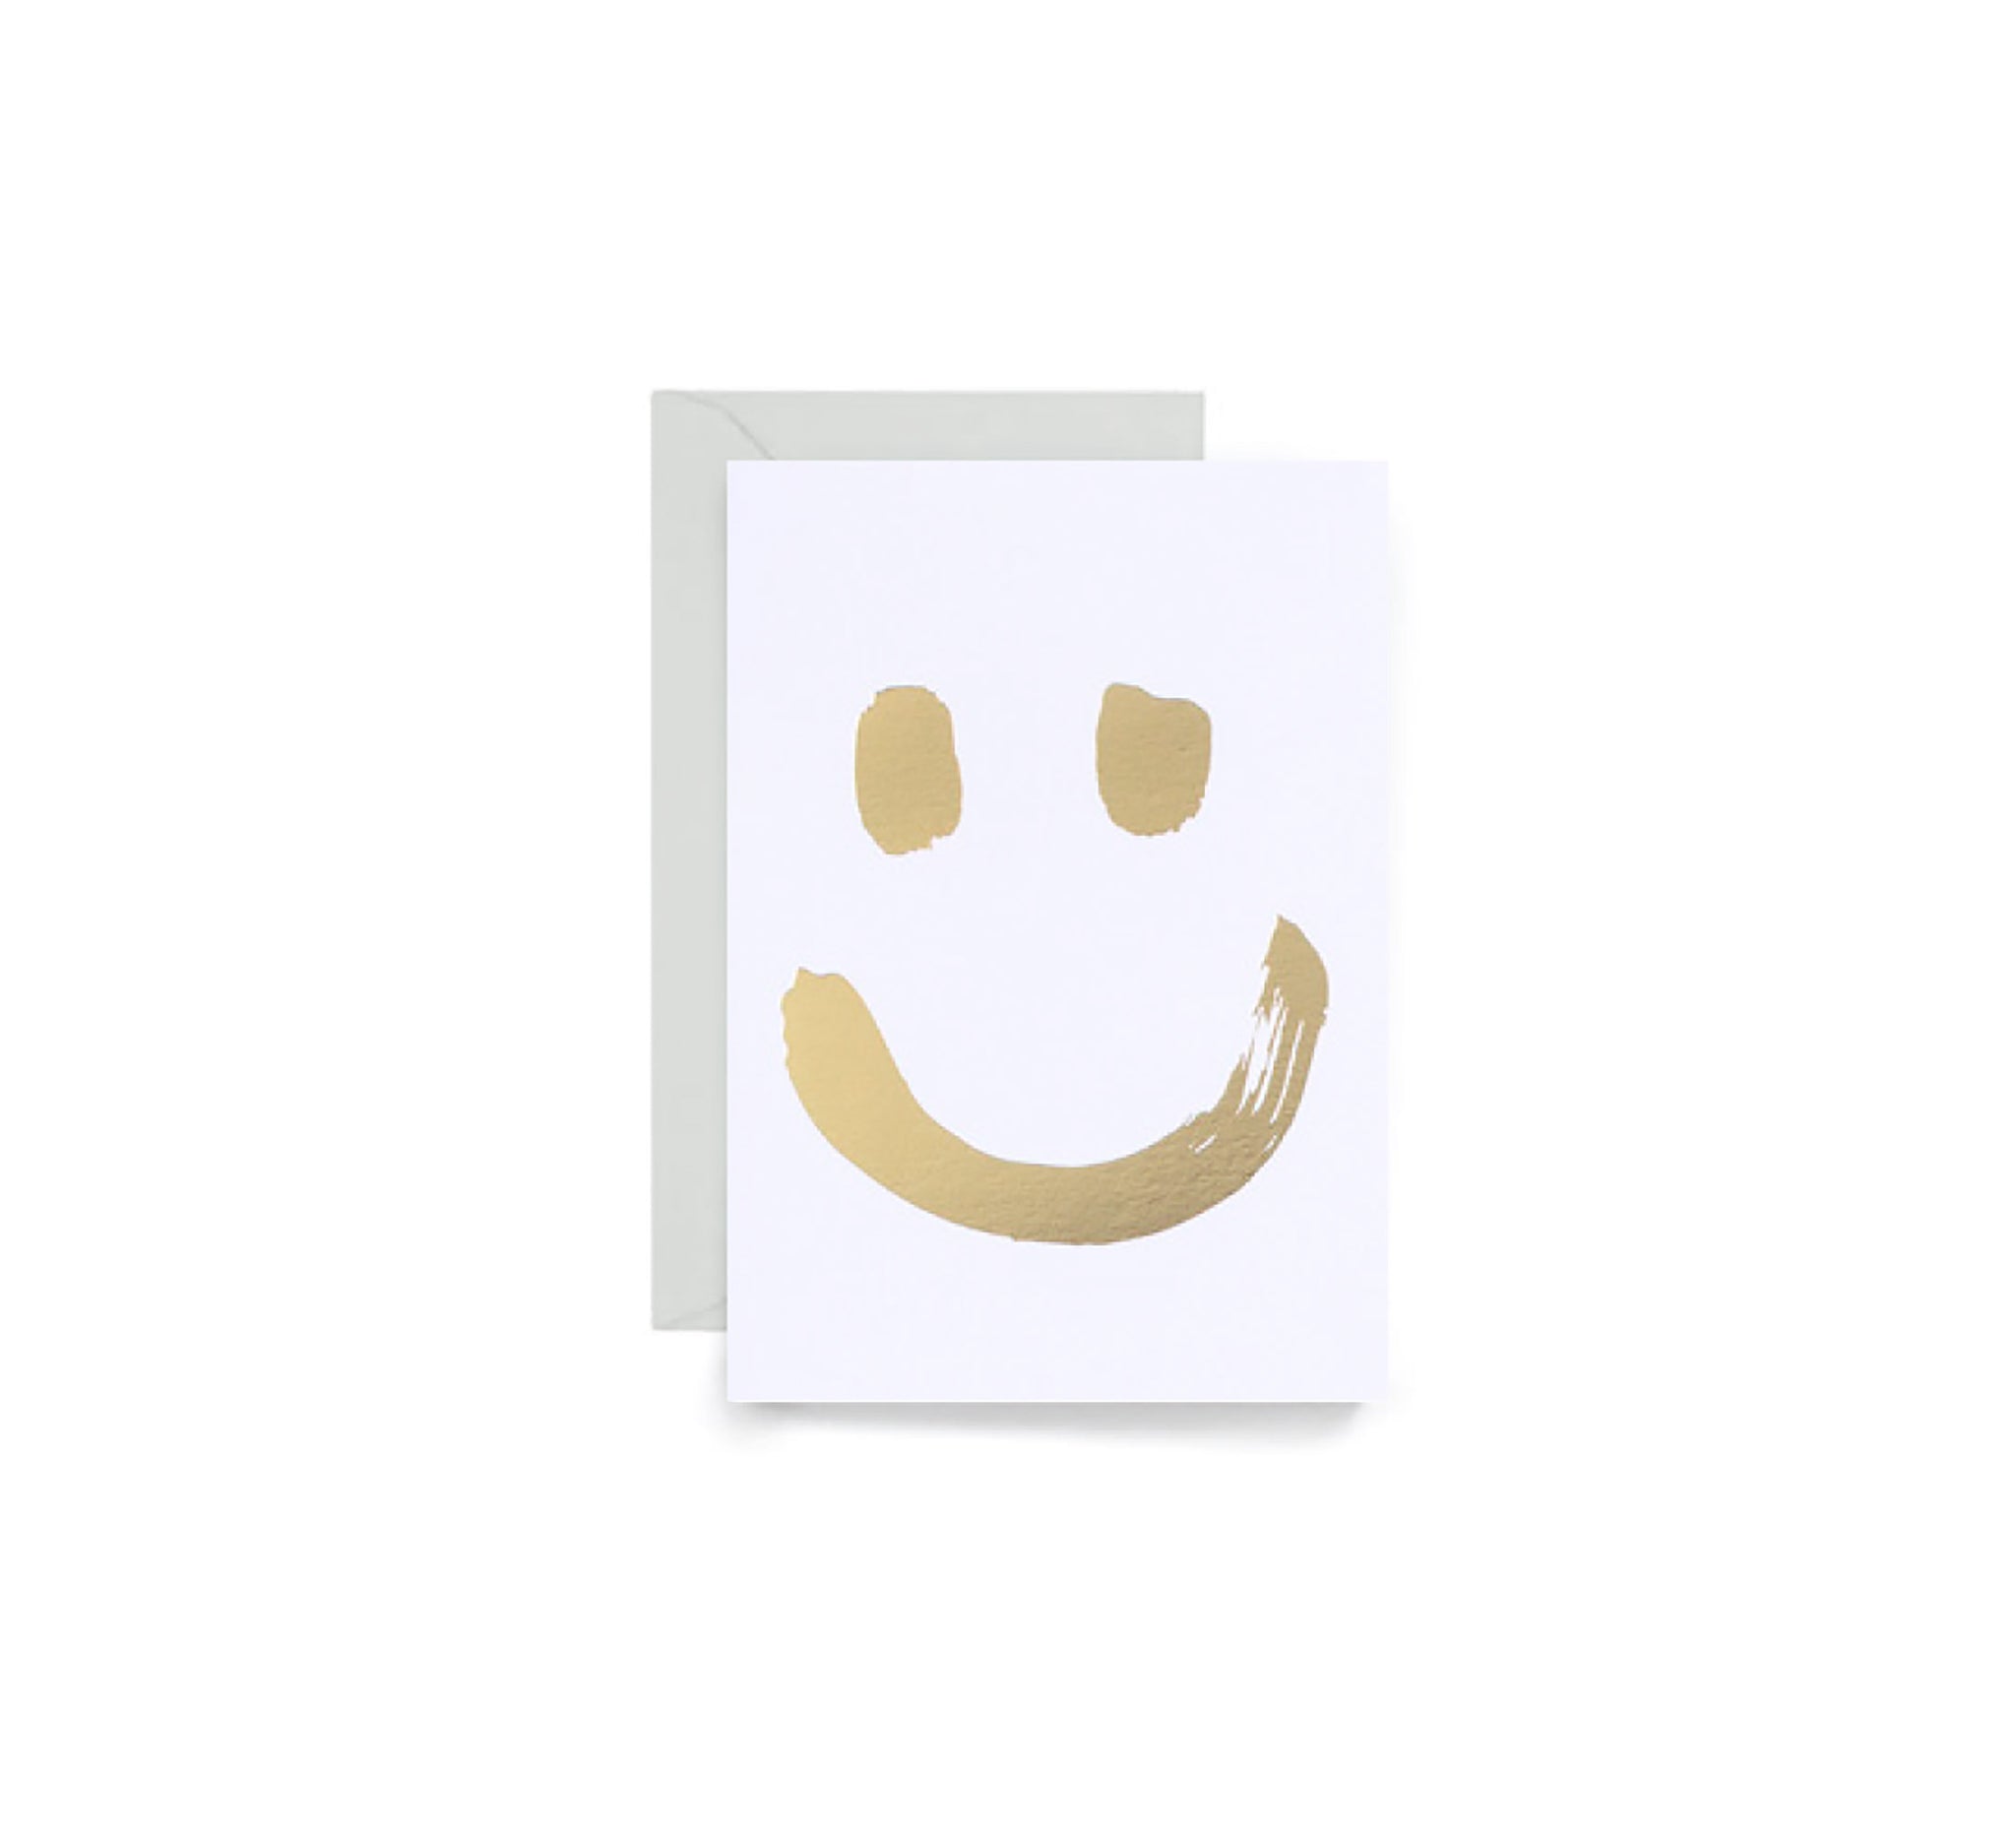 18. SMILEY CARDS - (PACK OF 6)